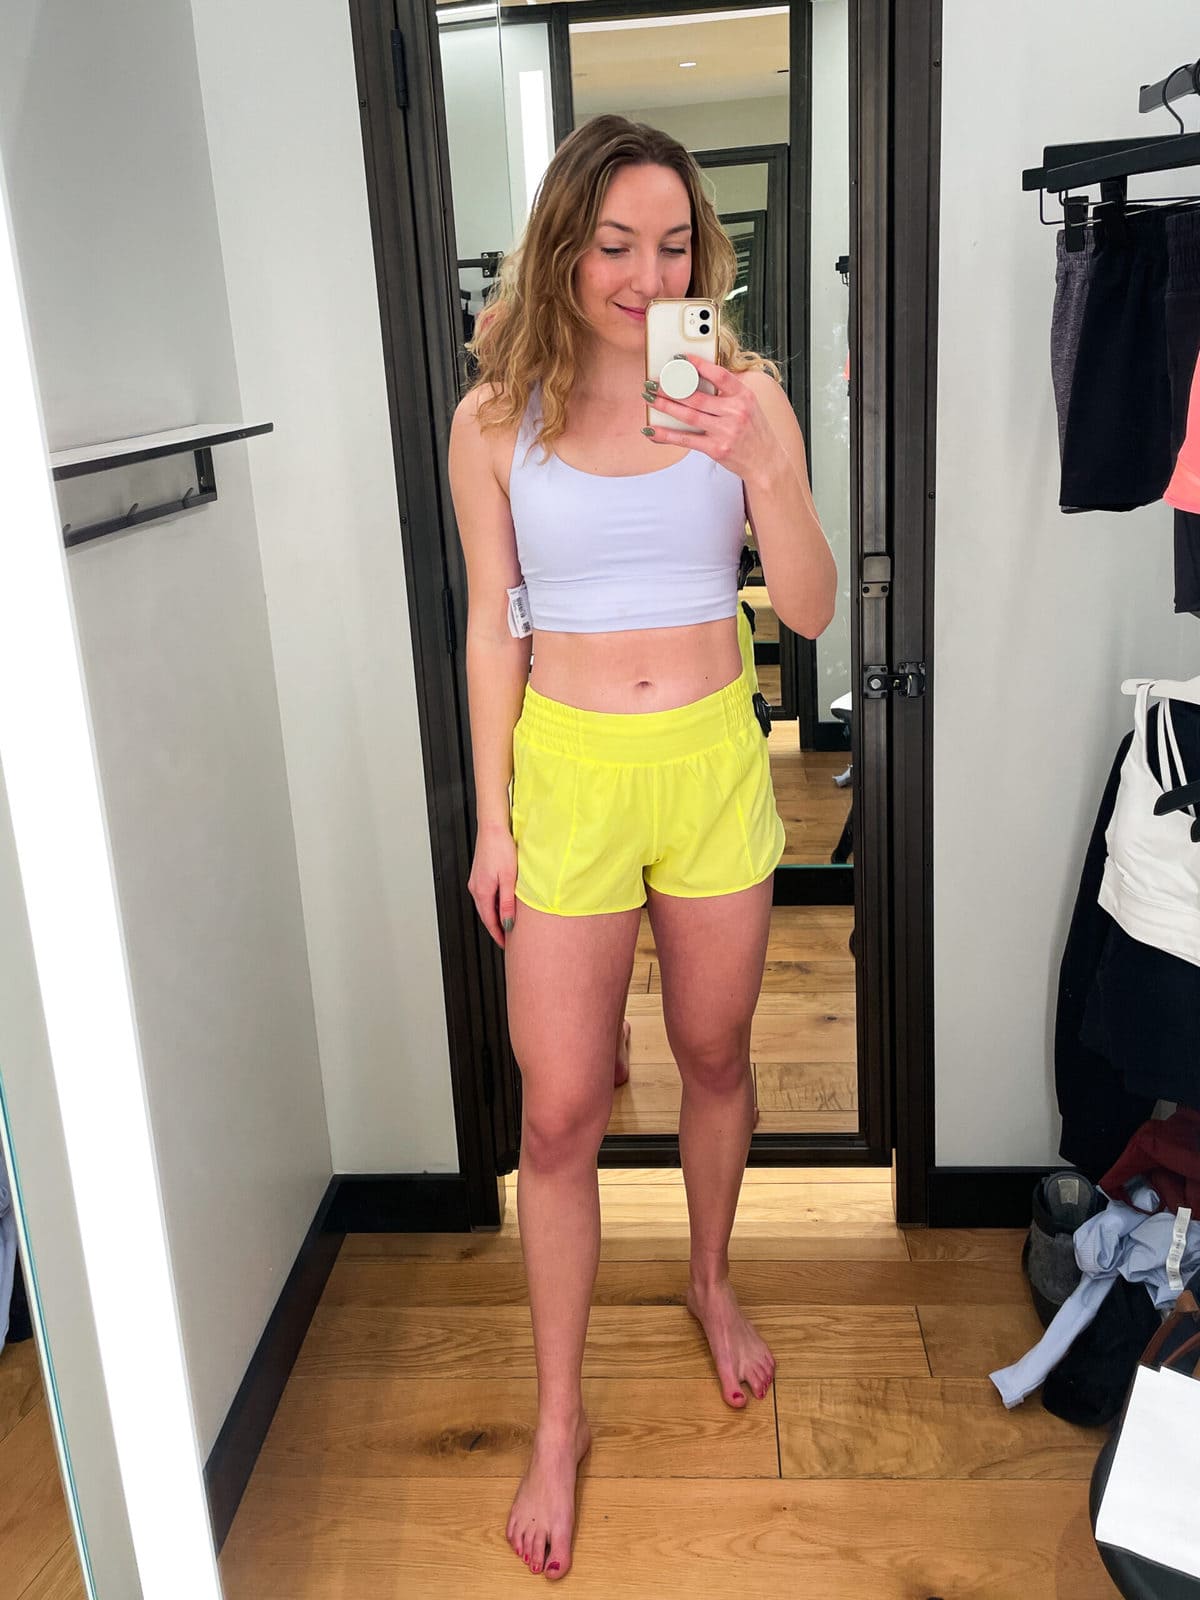 Rachel wearing Hotty Hot High Rise Short 2.5" in a dressing room mirror image